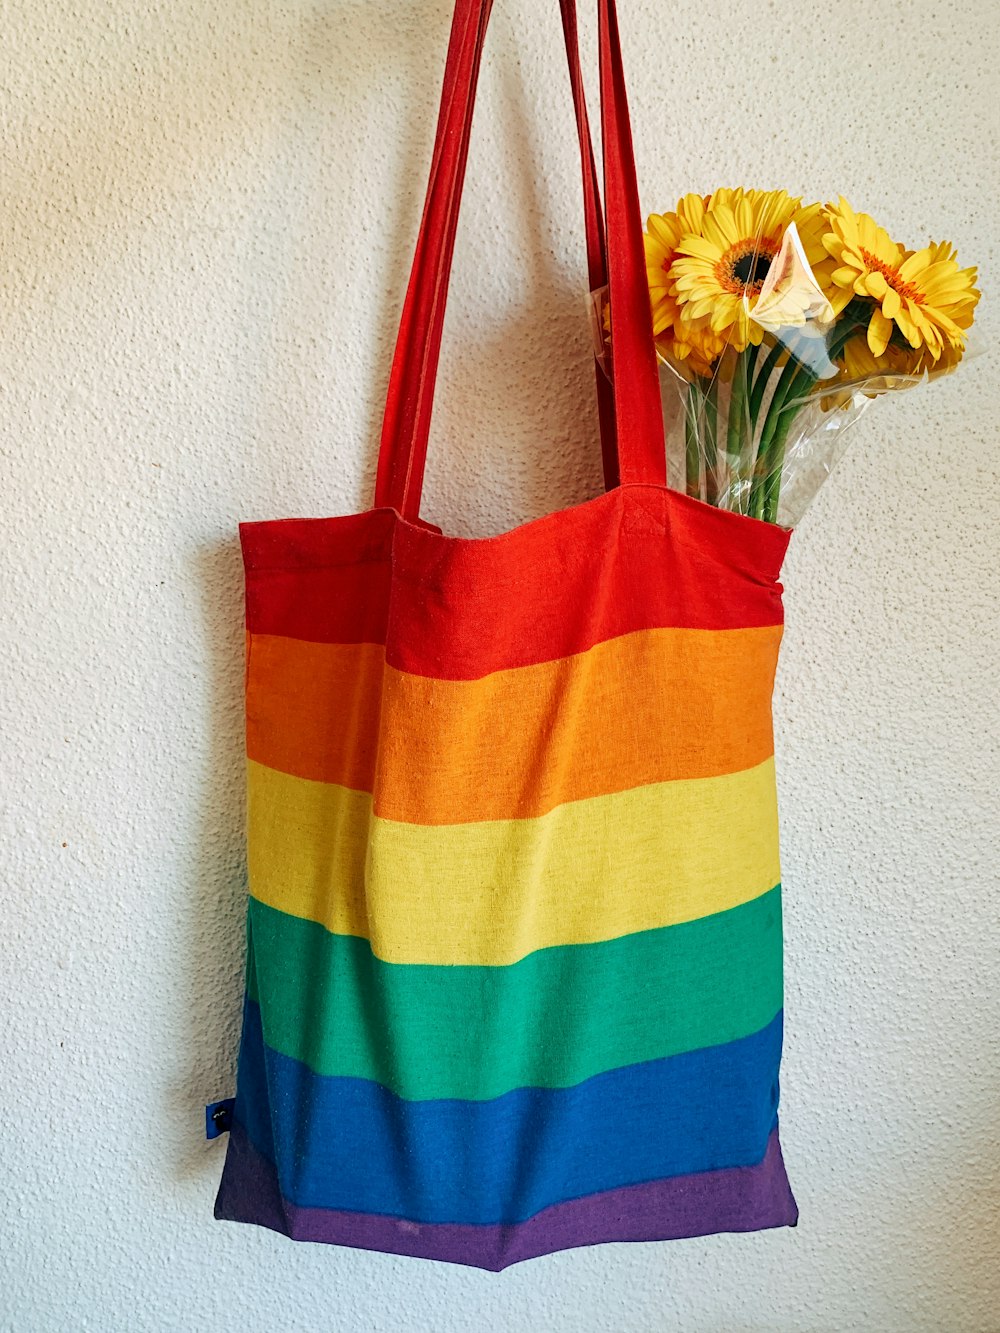 red blue and yellow striped tote bag